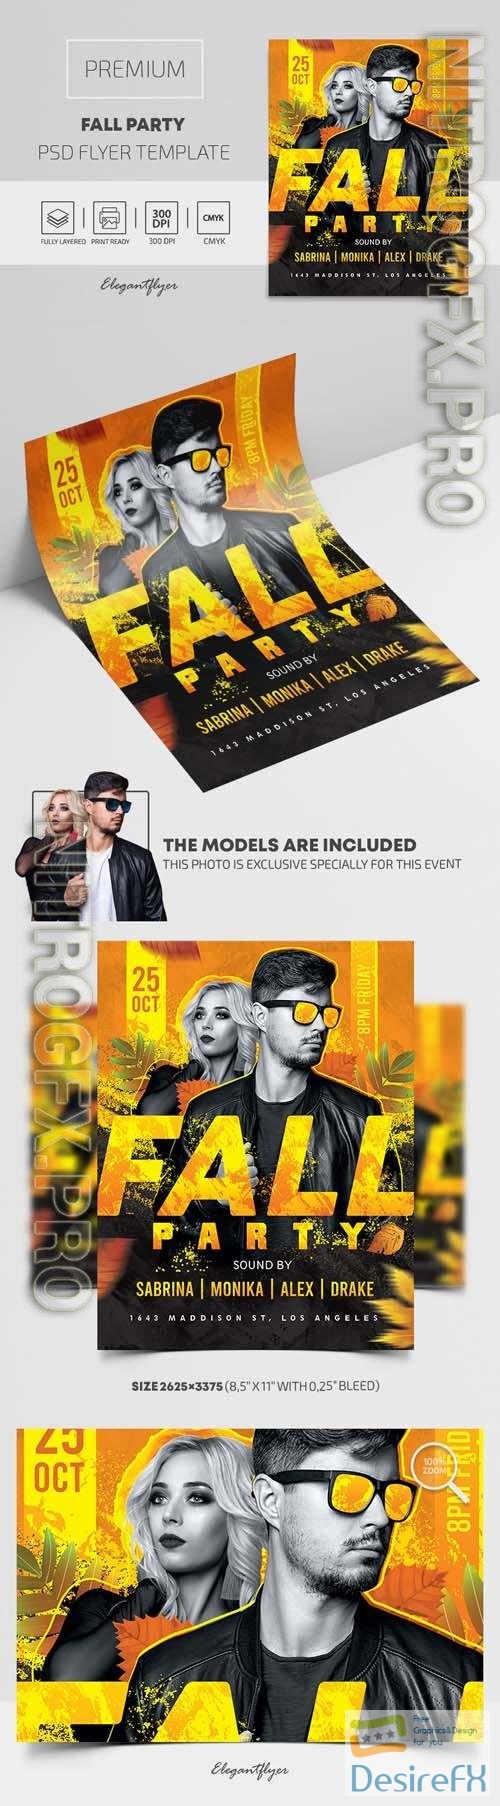 Fall Party Premium PSD Flyer Template